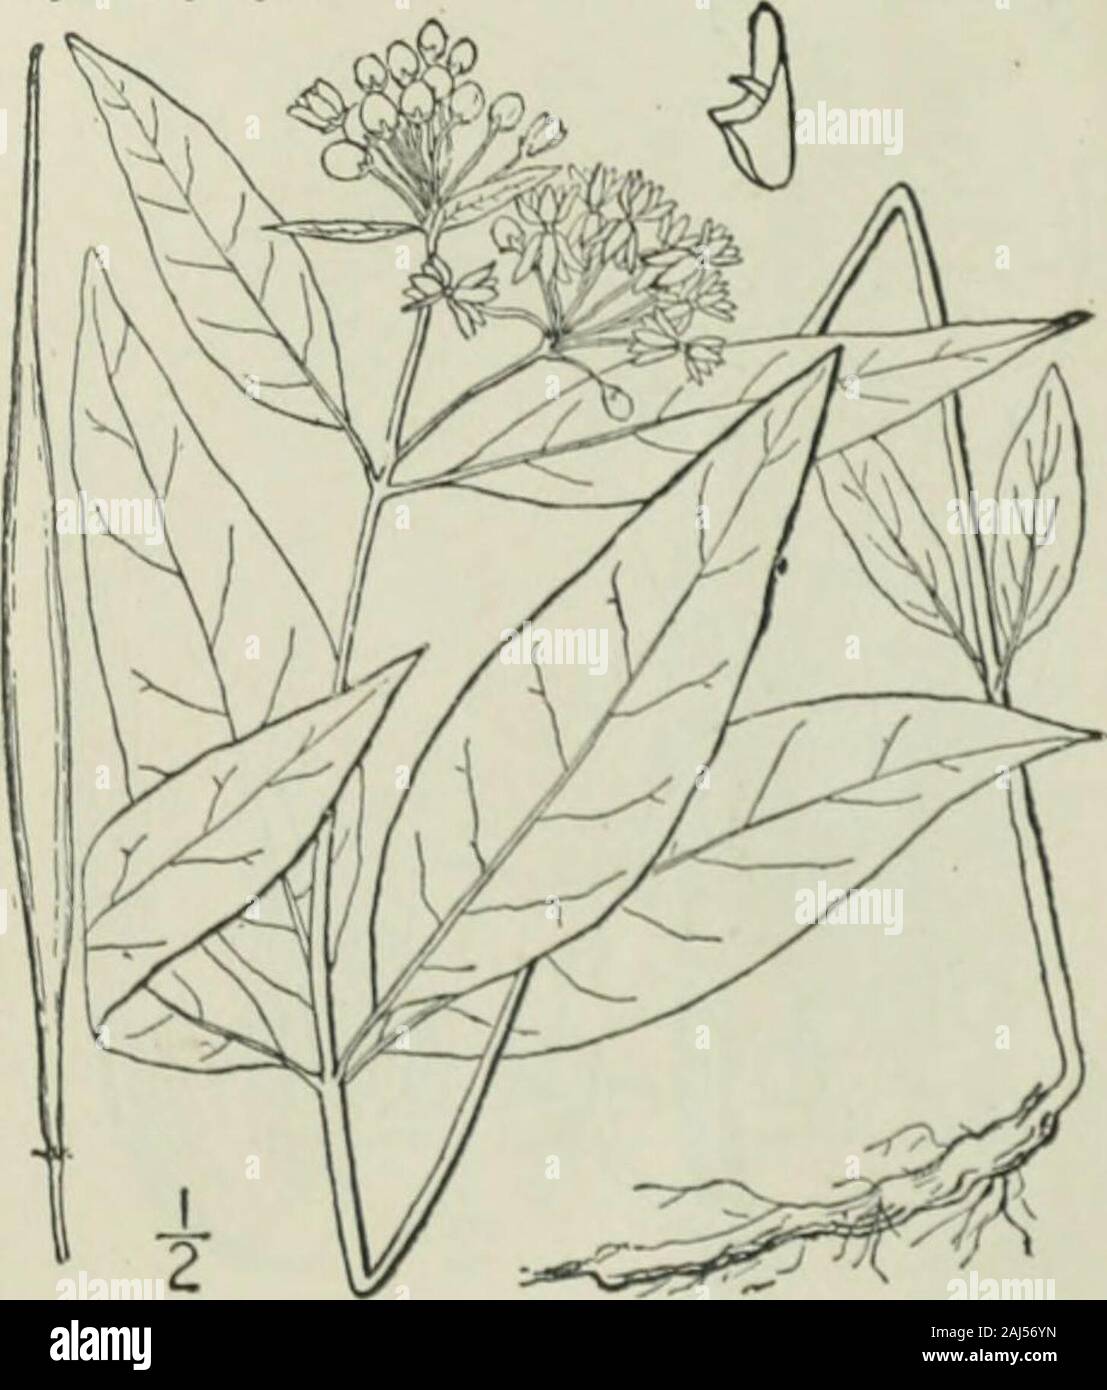 An illustrated flora of the northern United States, Canada and the British possessions : from Newfoundland to the parallel of the southern boundary of Virginia and from the Atlantic Ocean westward to the 102nd meridian . 15. Asclepias quadrifolia J acq. Four-leaved Milkweed. Fig. 3397. A. quadrifolia Jacq. Obs. Part 2. 8. pi. 33- 1767. Stem slender, simple, i°-2° high, usually leaf-less below. Leaves thin, sparingly pubescent onthe veins beneath, ovate to lanceolate, 2-6 long,h-2h wide, acute or acuminate, narrowed orrounded at the base, or the lowest pair muchsmaller, obovate and obtuse, the Stock Photo